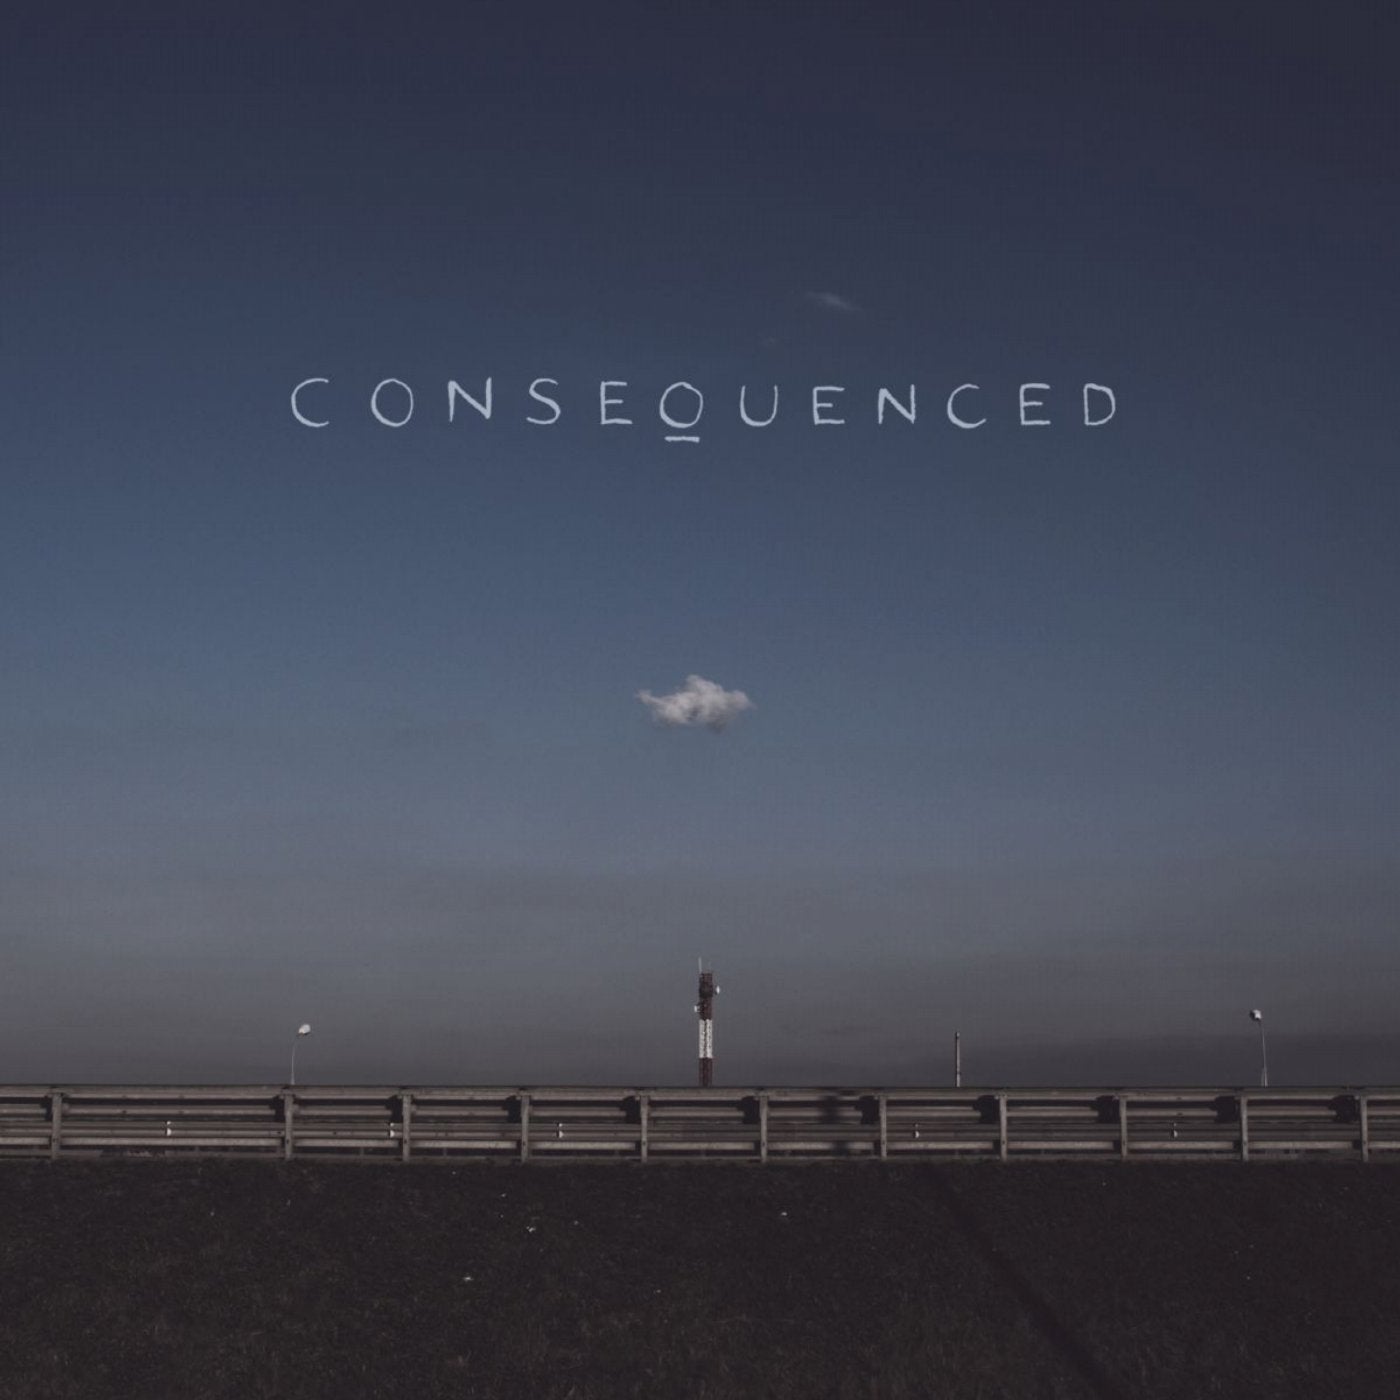 Consequenced